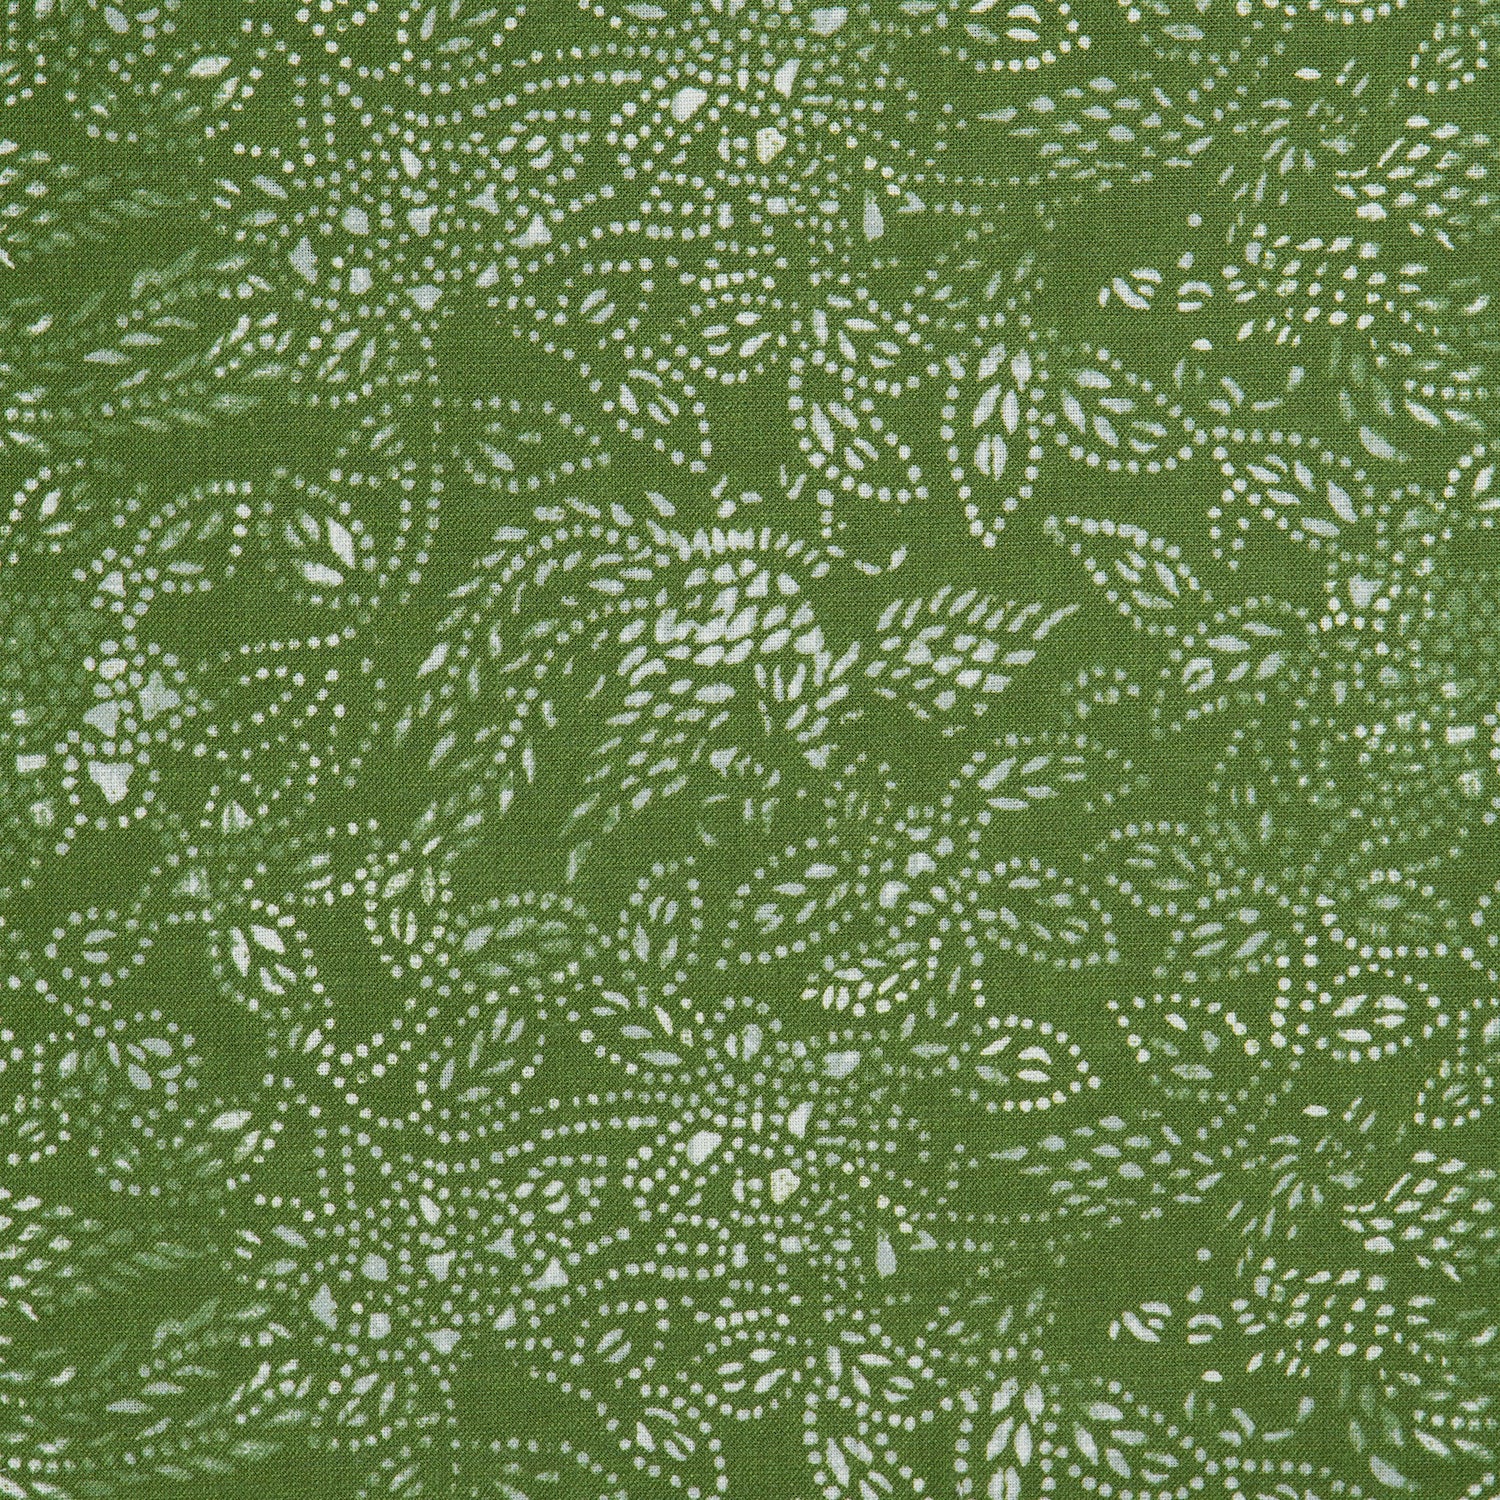 Detail of a linen fabric in a dotted leaf pattern in white on a green field.